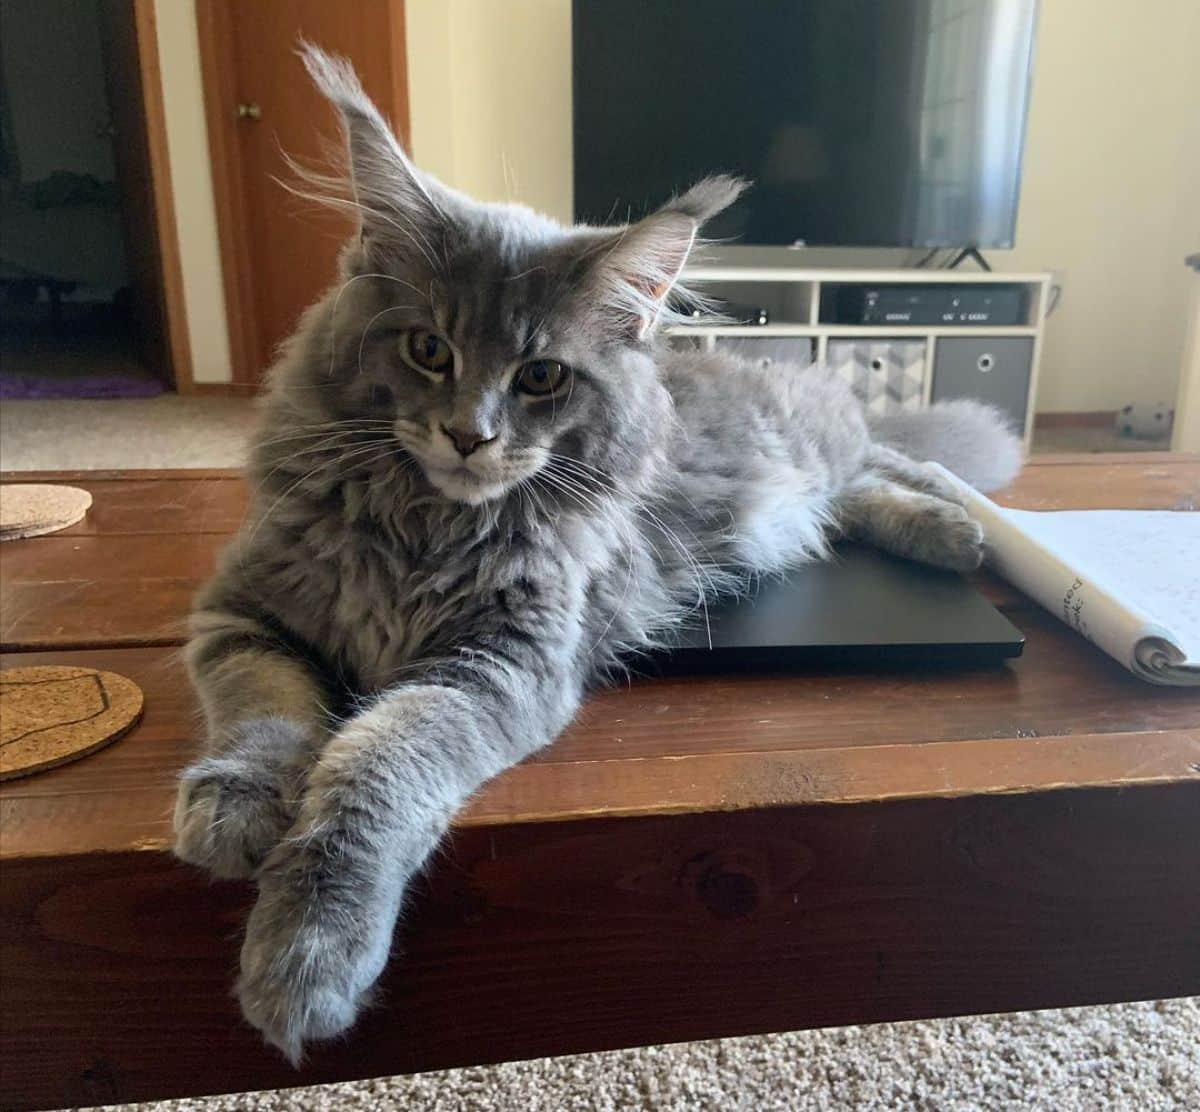 An adorable gray maine coon lying on a coffee table.